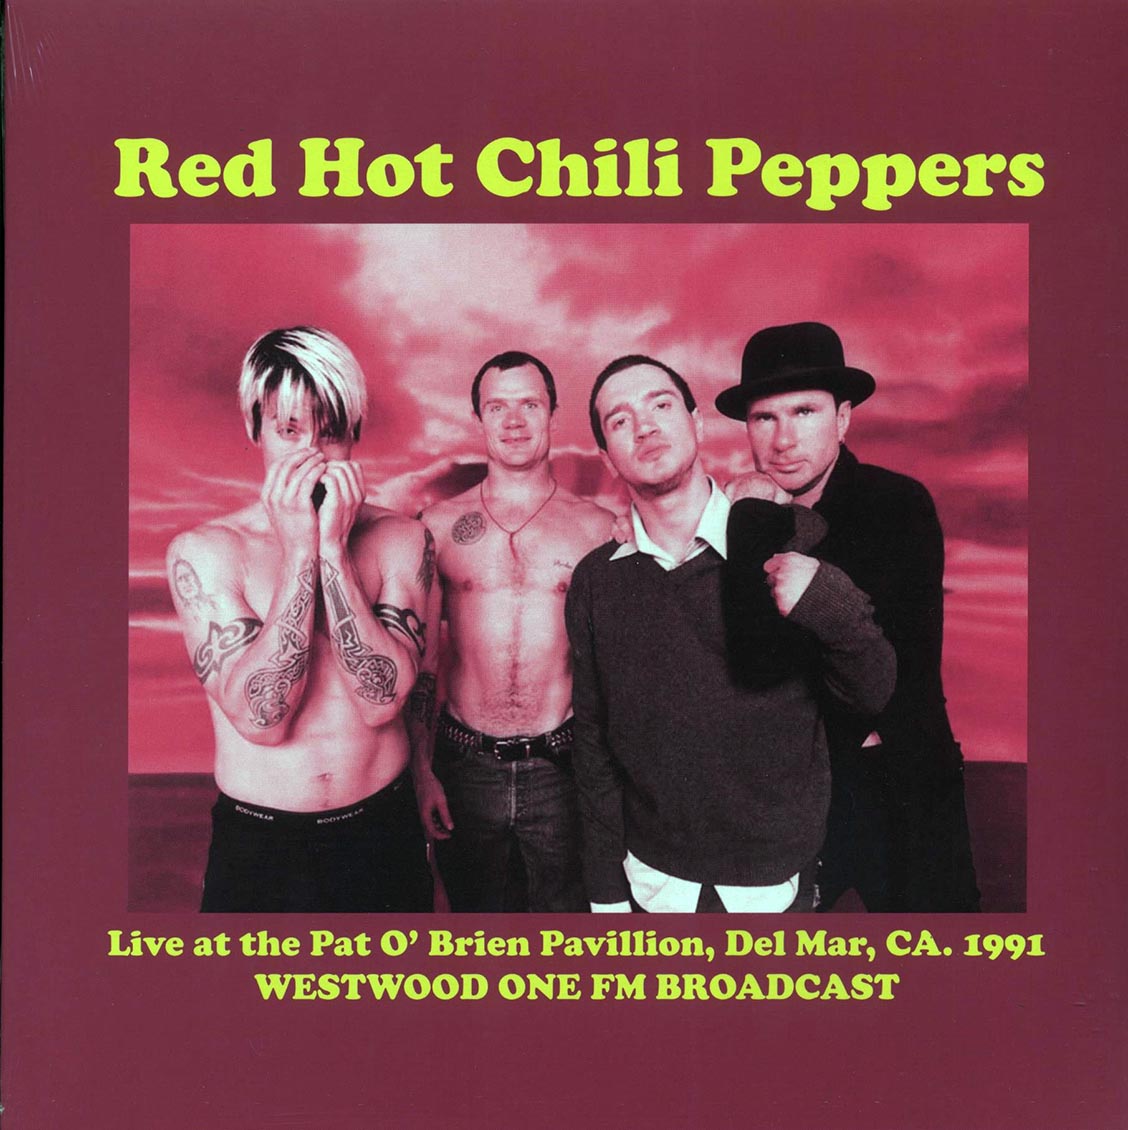 Red Hot Chili Peppers - Live At The Pat O'Brien Pavillion, Del Mar, CA 1991 Westwood One FM Broadcast (ltd. 500 copies made) - Vinyl LP